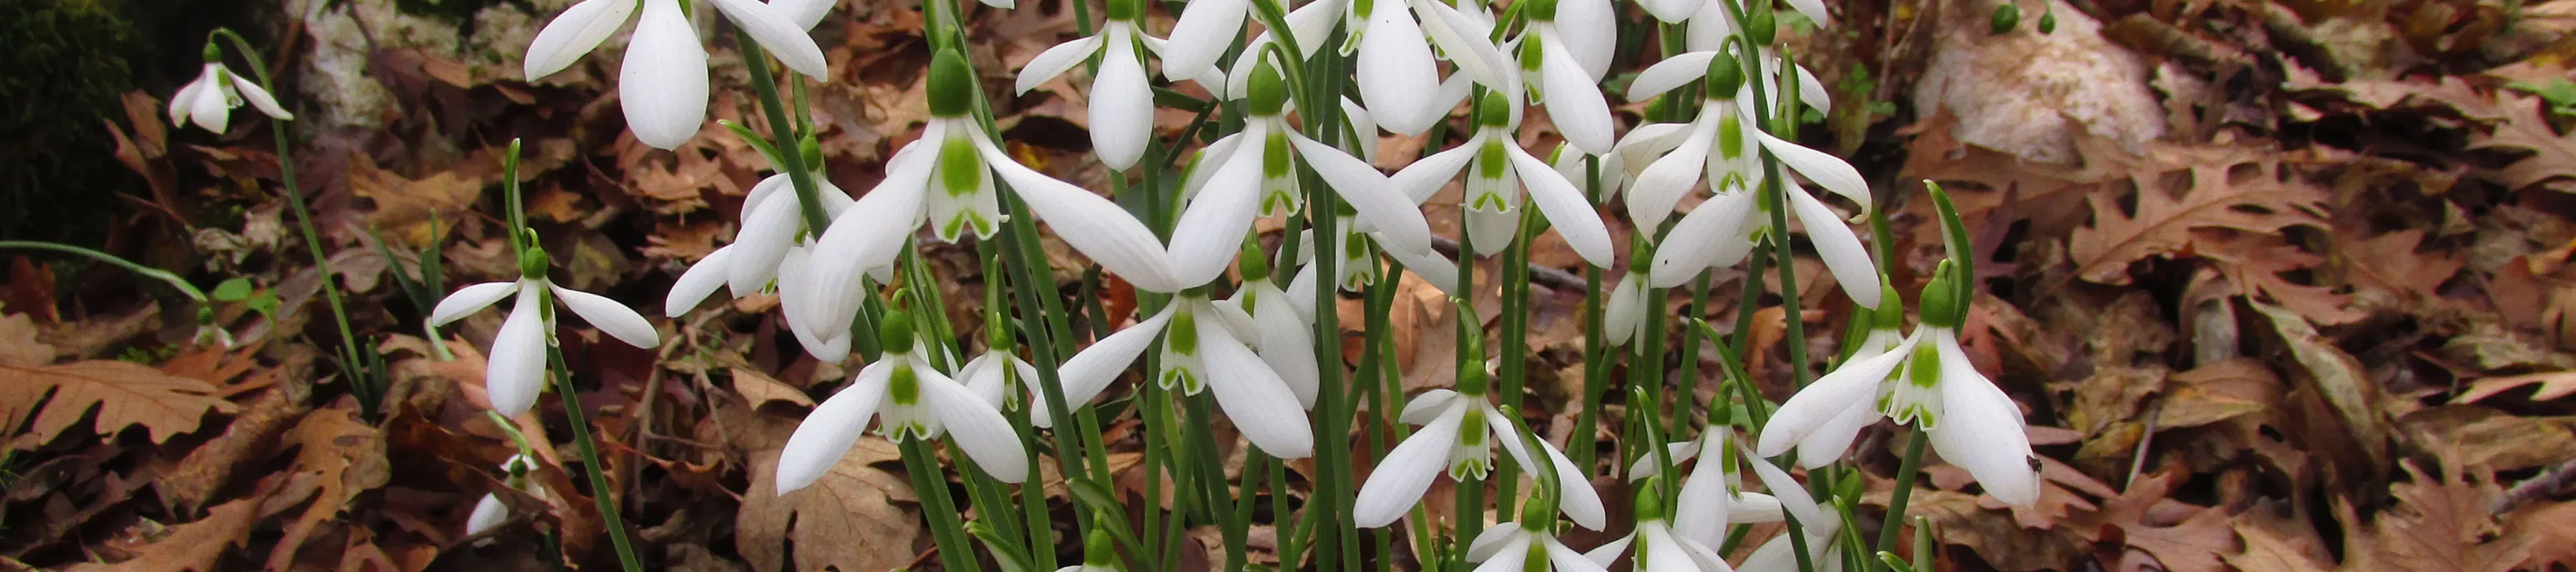 Close up of a cluster of new snowdrops